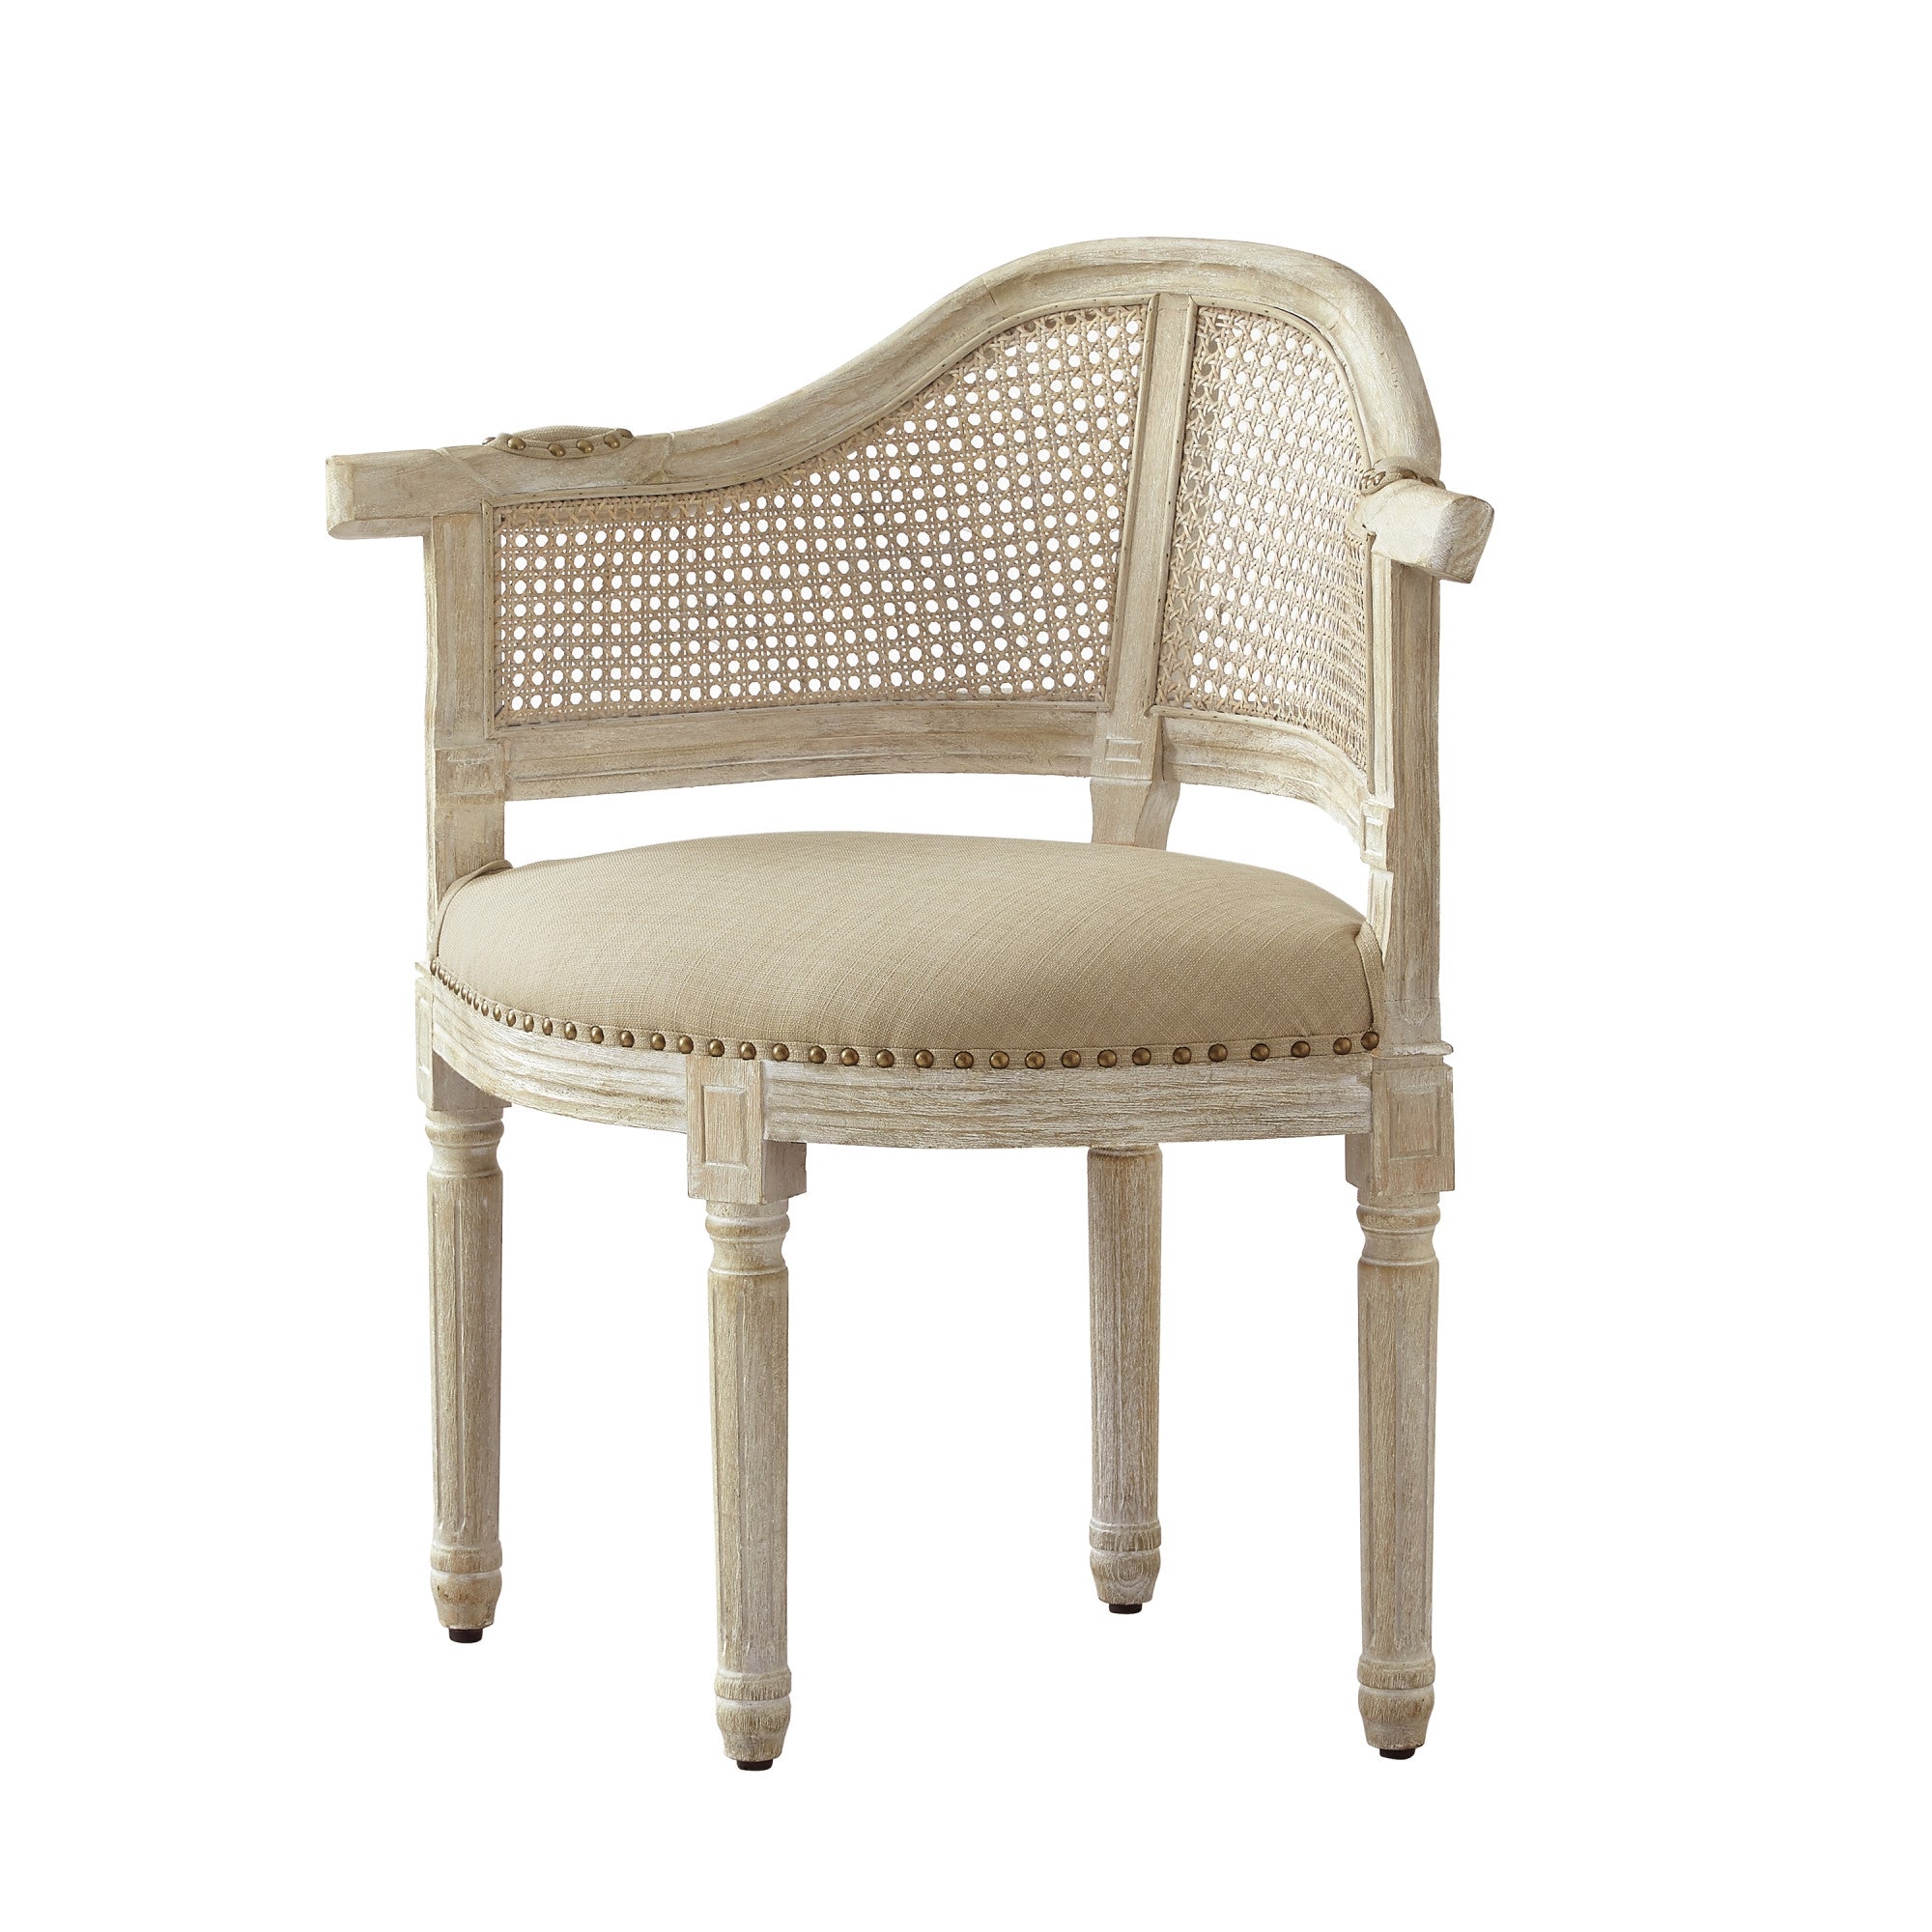 24" Navy Blue And Beige Linen Arm Chair